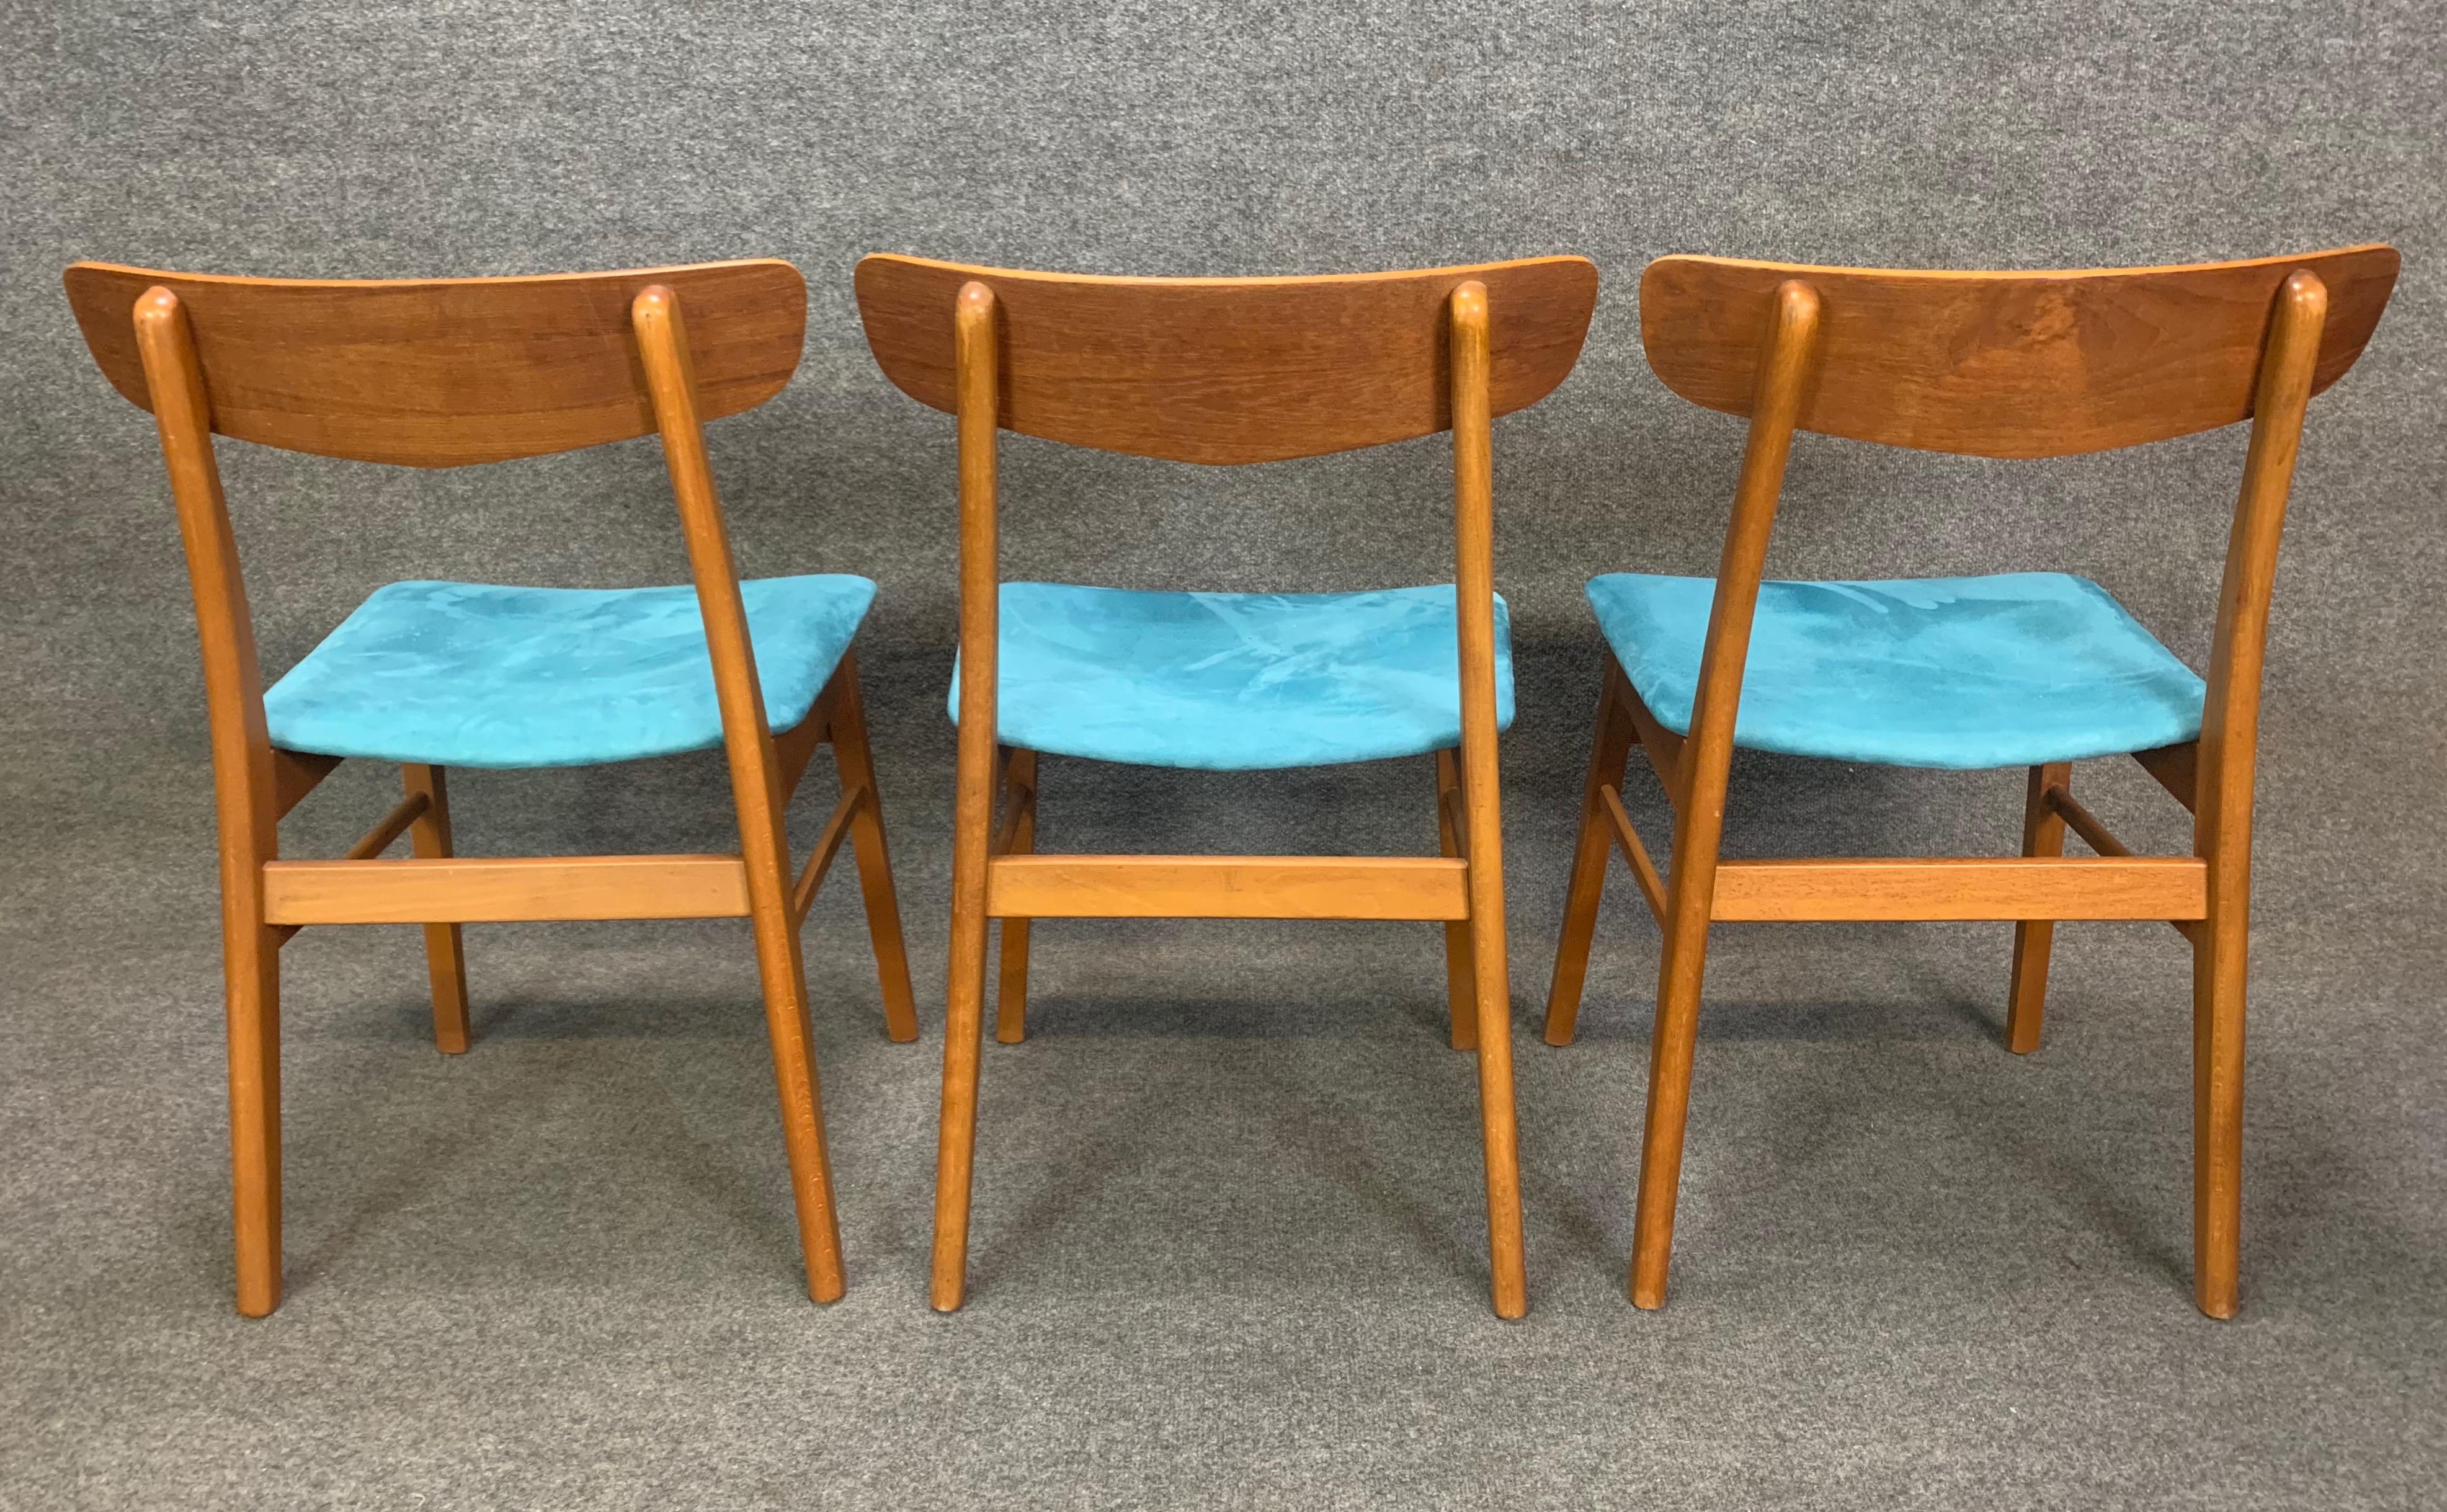 Here is a beautiful set of six Scandinavian Modern dining chairs manufactured in Denmark in the 1960s by Findhahls Møbelfabrik.
These comfortable and Classic chairs, recently refinished, feature a solid birch wood frame and a solid teak backrest.